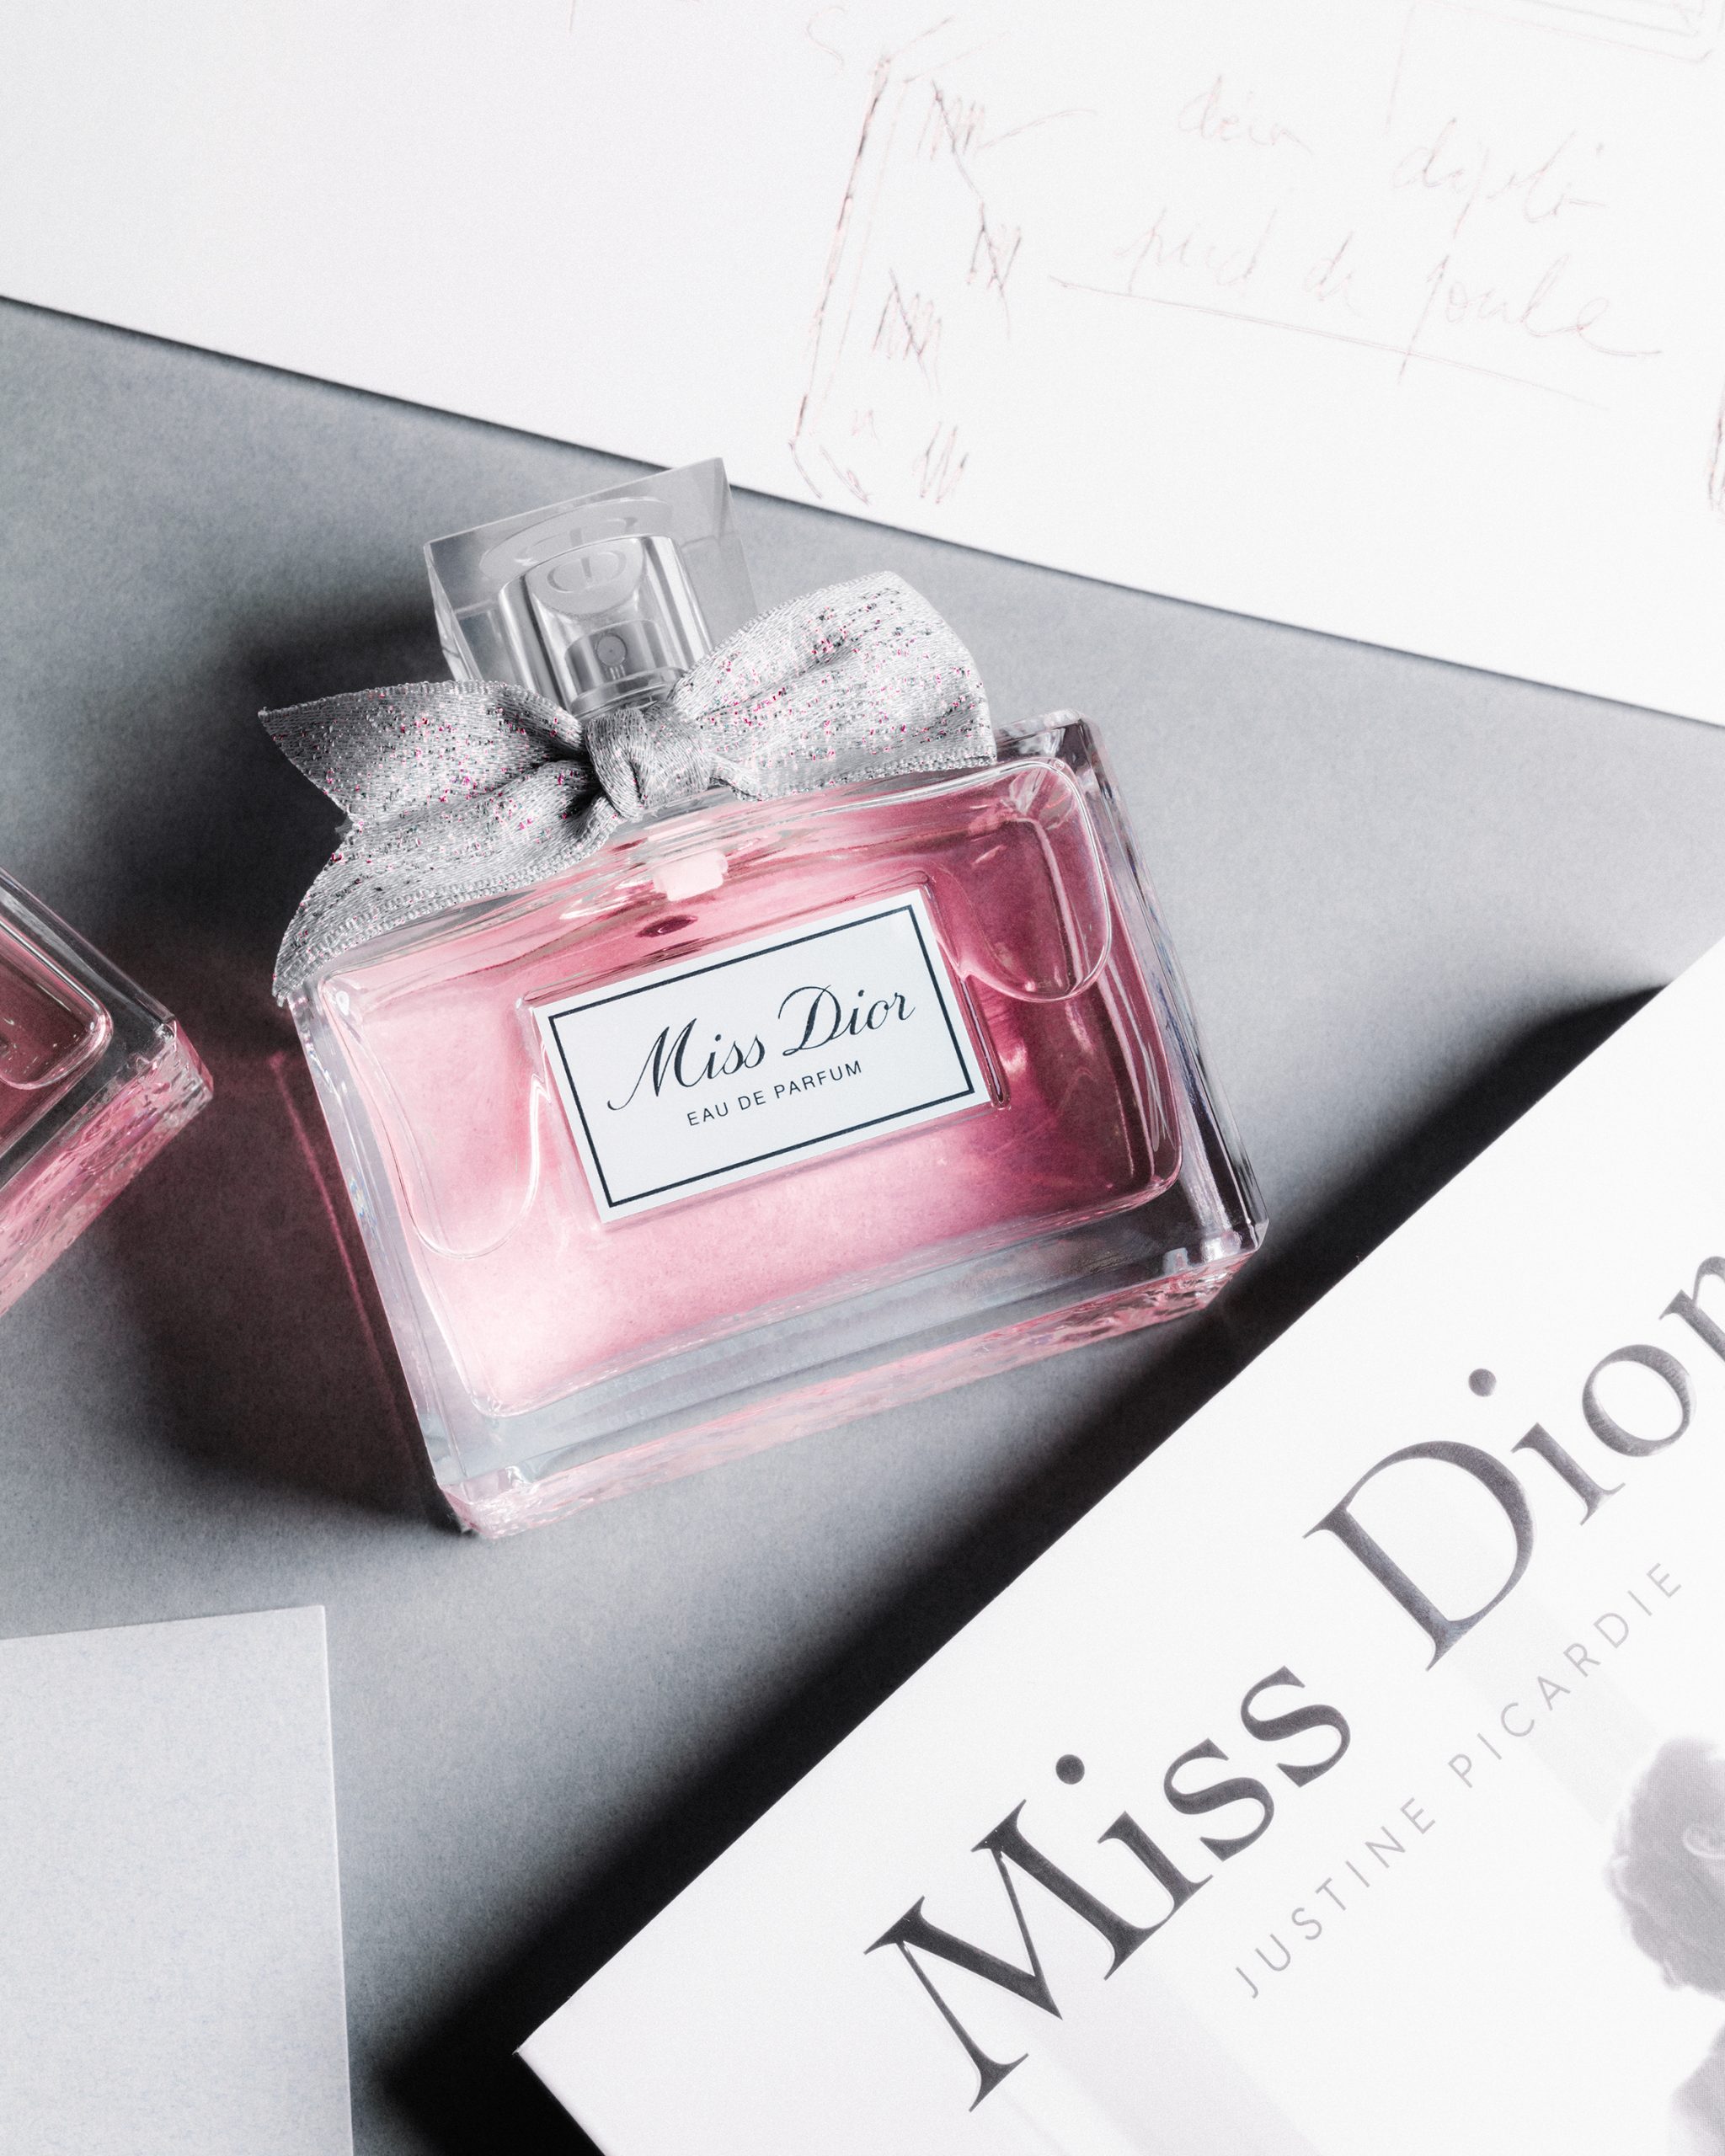 "A Story of Courage and Couture": H Miss Dior... έγινε βιβλίο.